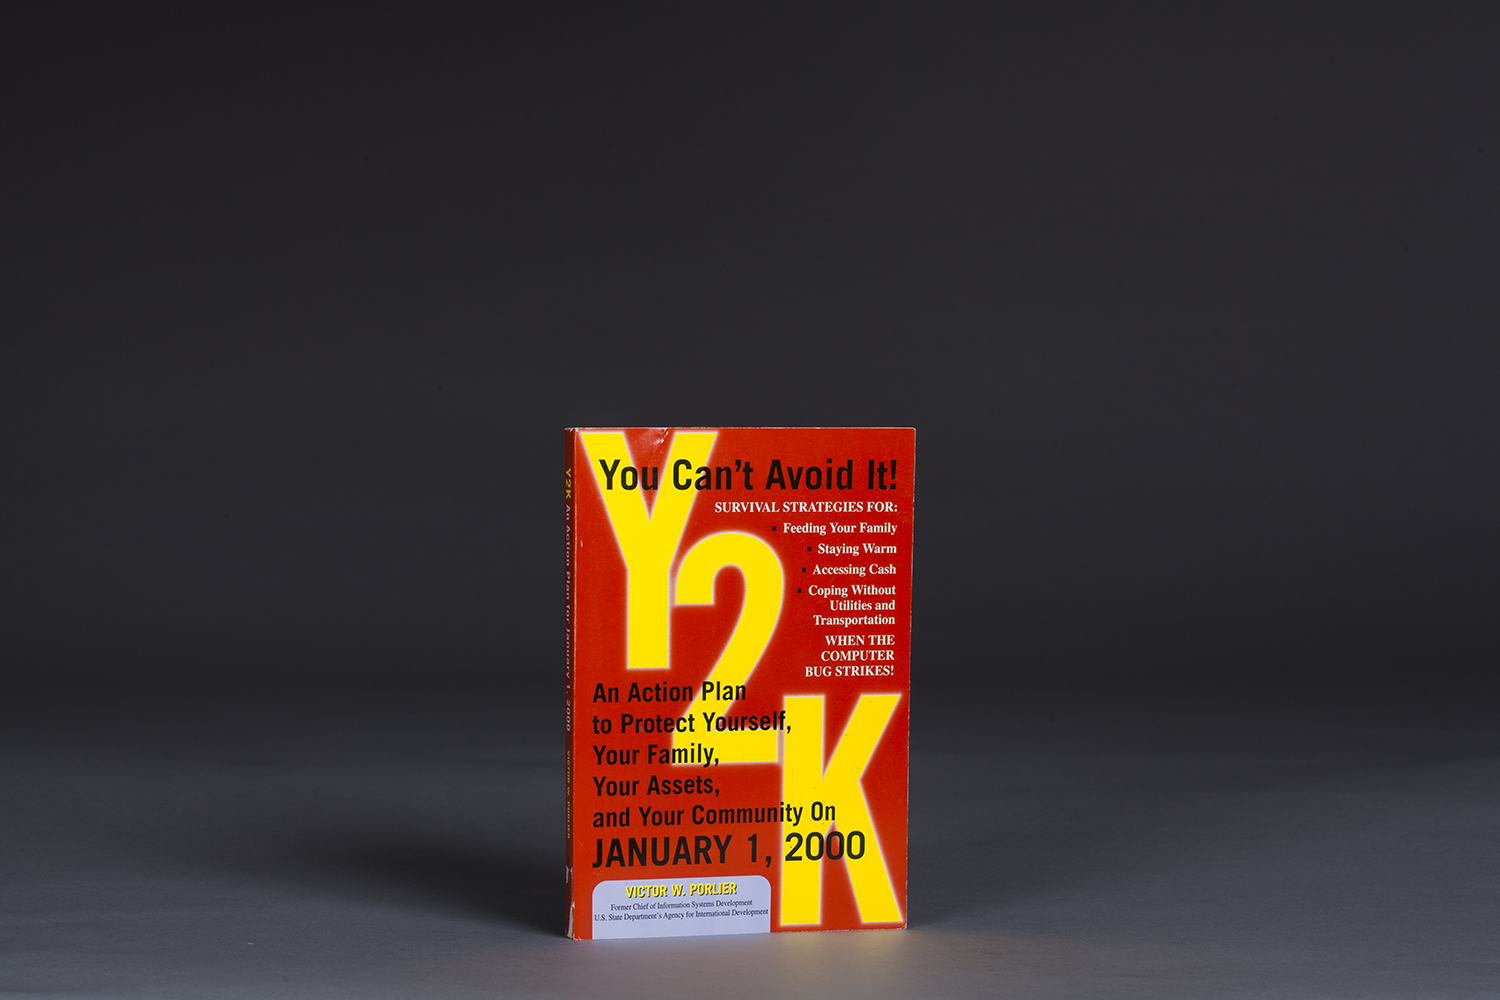 Y2K An Action Plan to Protect Yourself - 9898 Cover.jpg